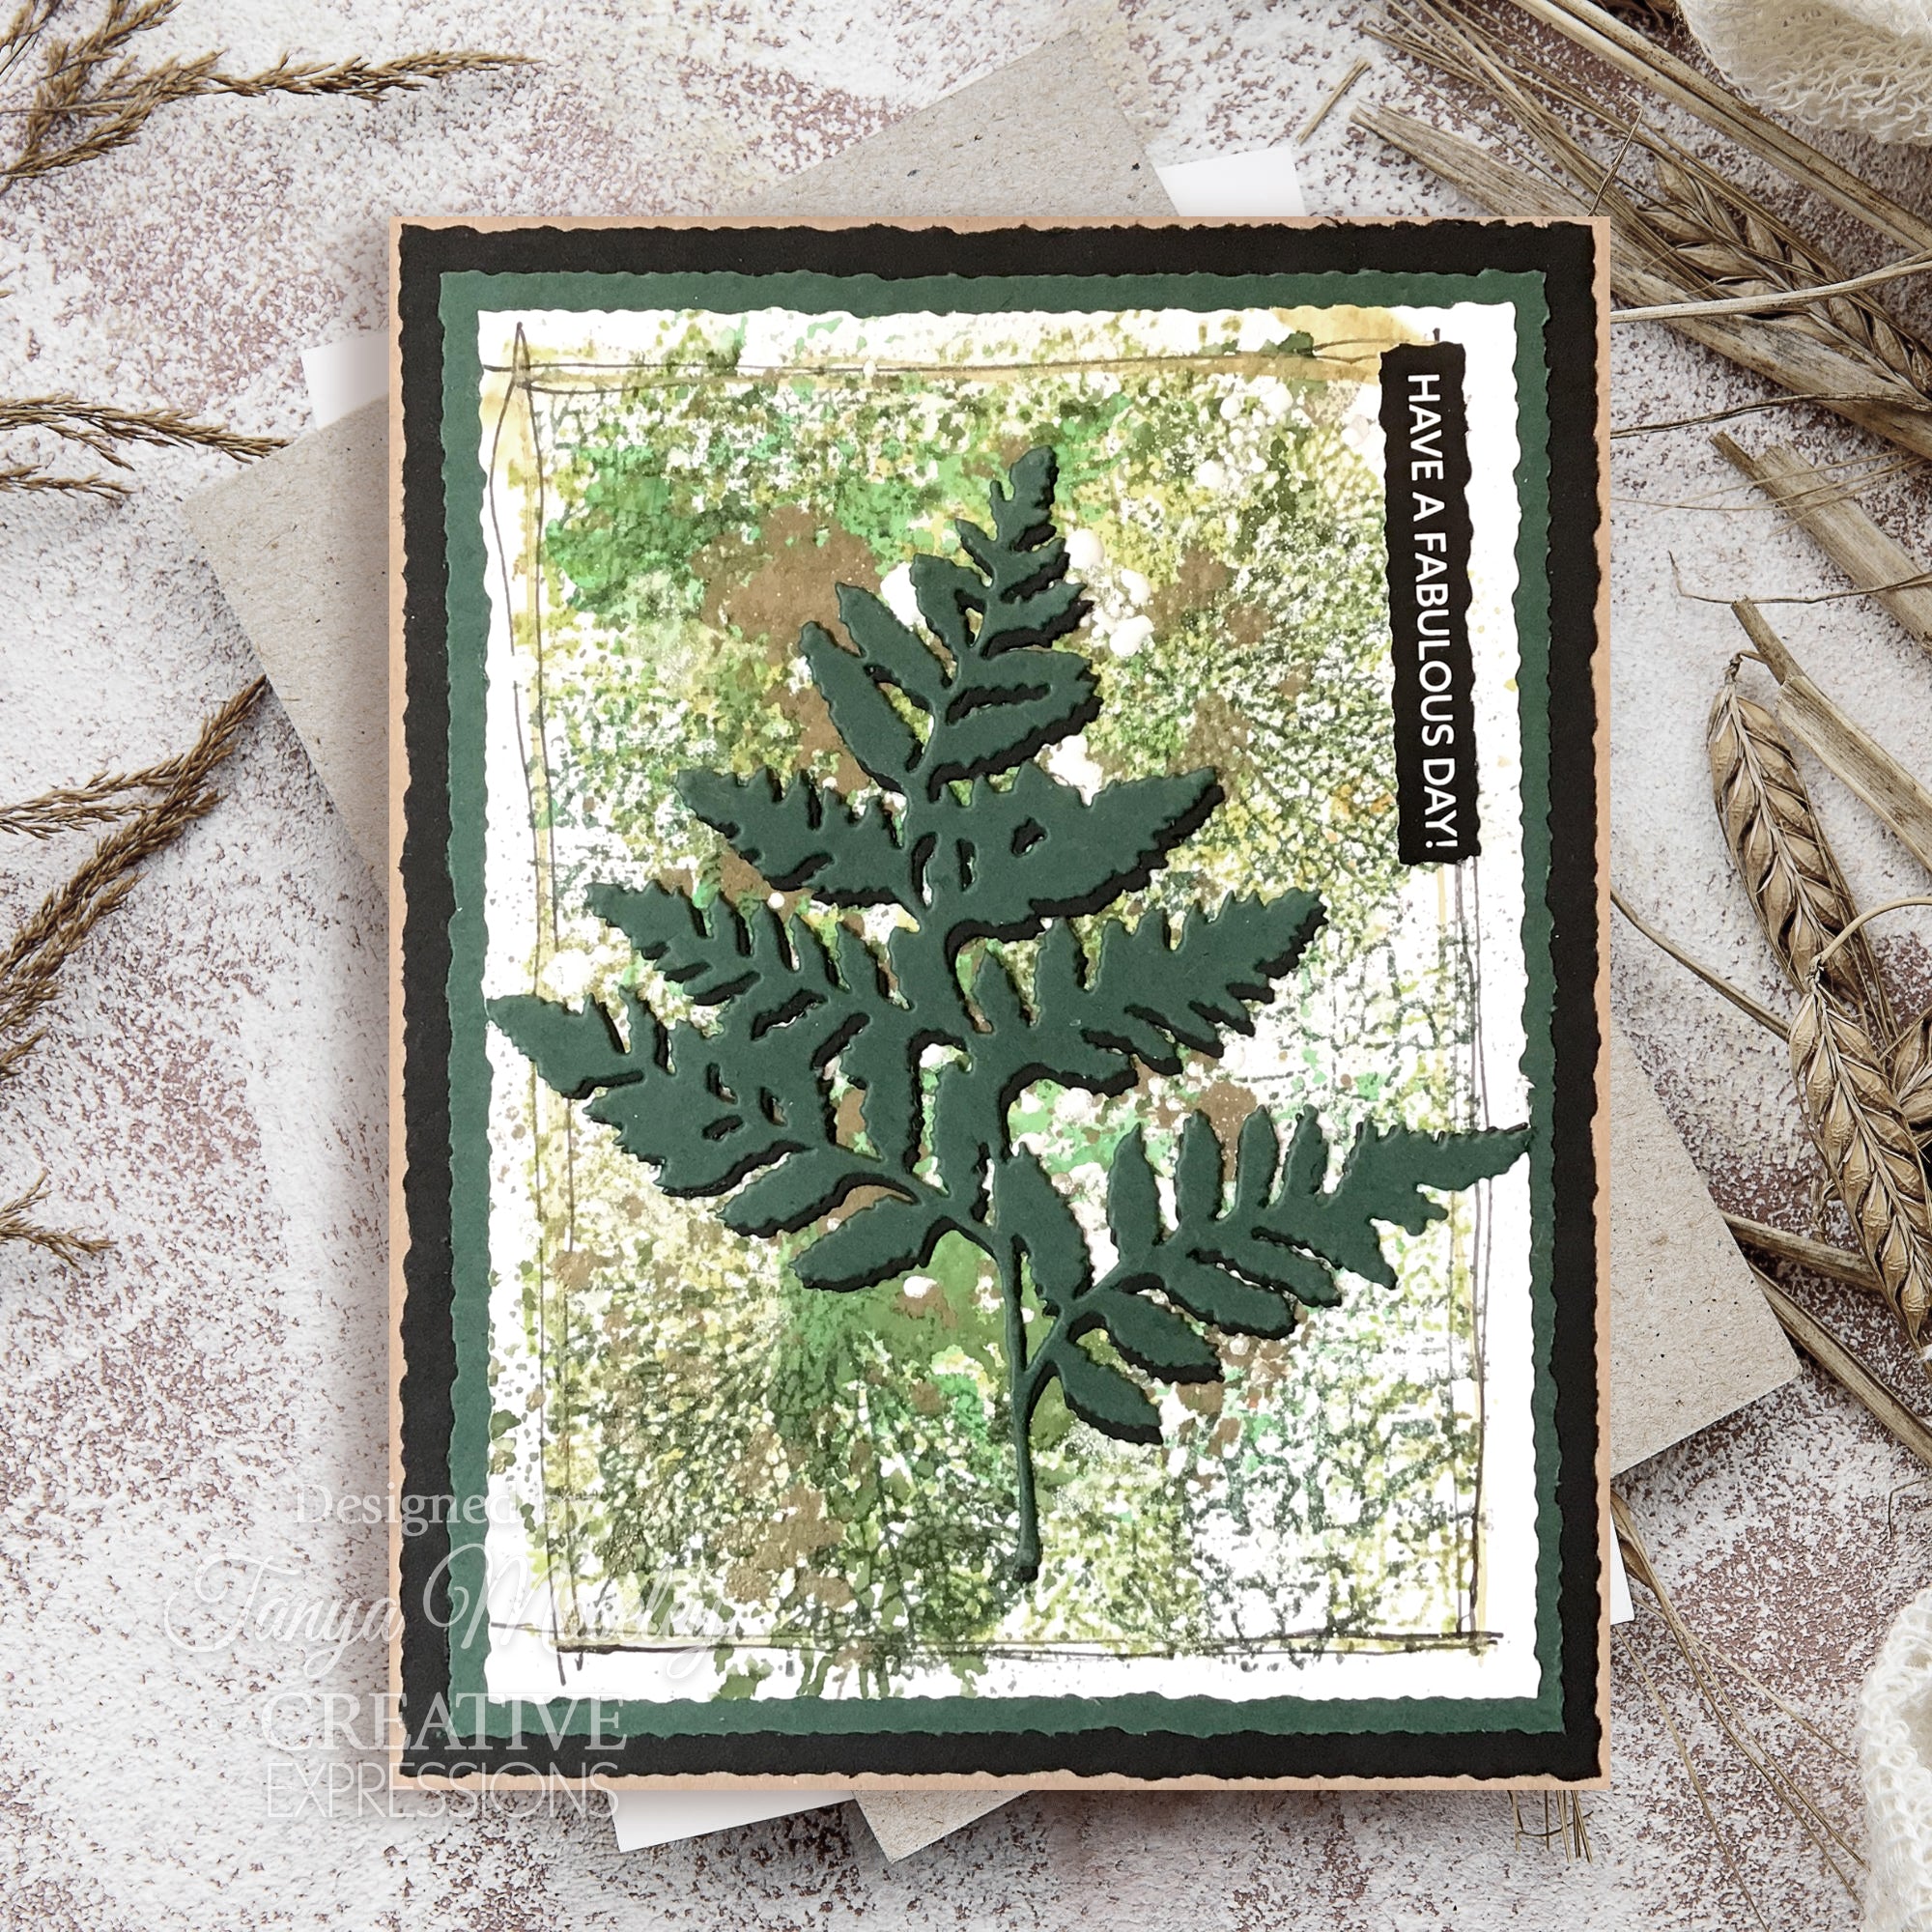 Creative Expressions Sam Poole Nature's Fragments 4 in x 6 in Pre-Cut Rubber Stamp